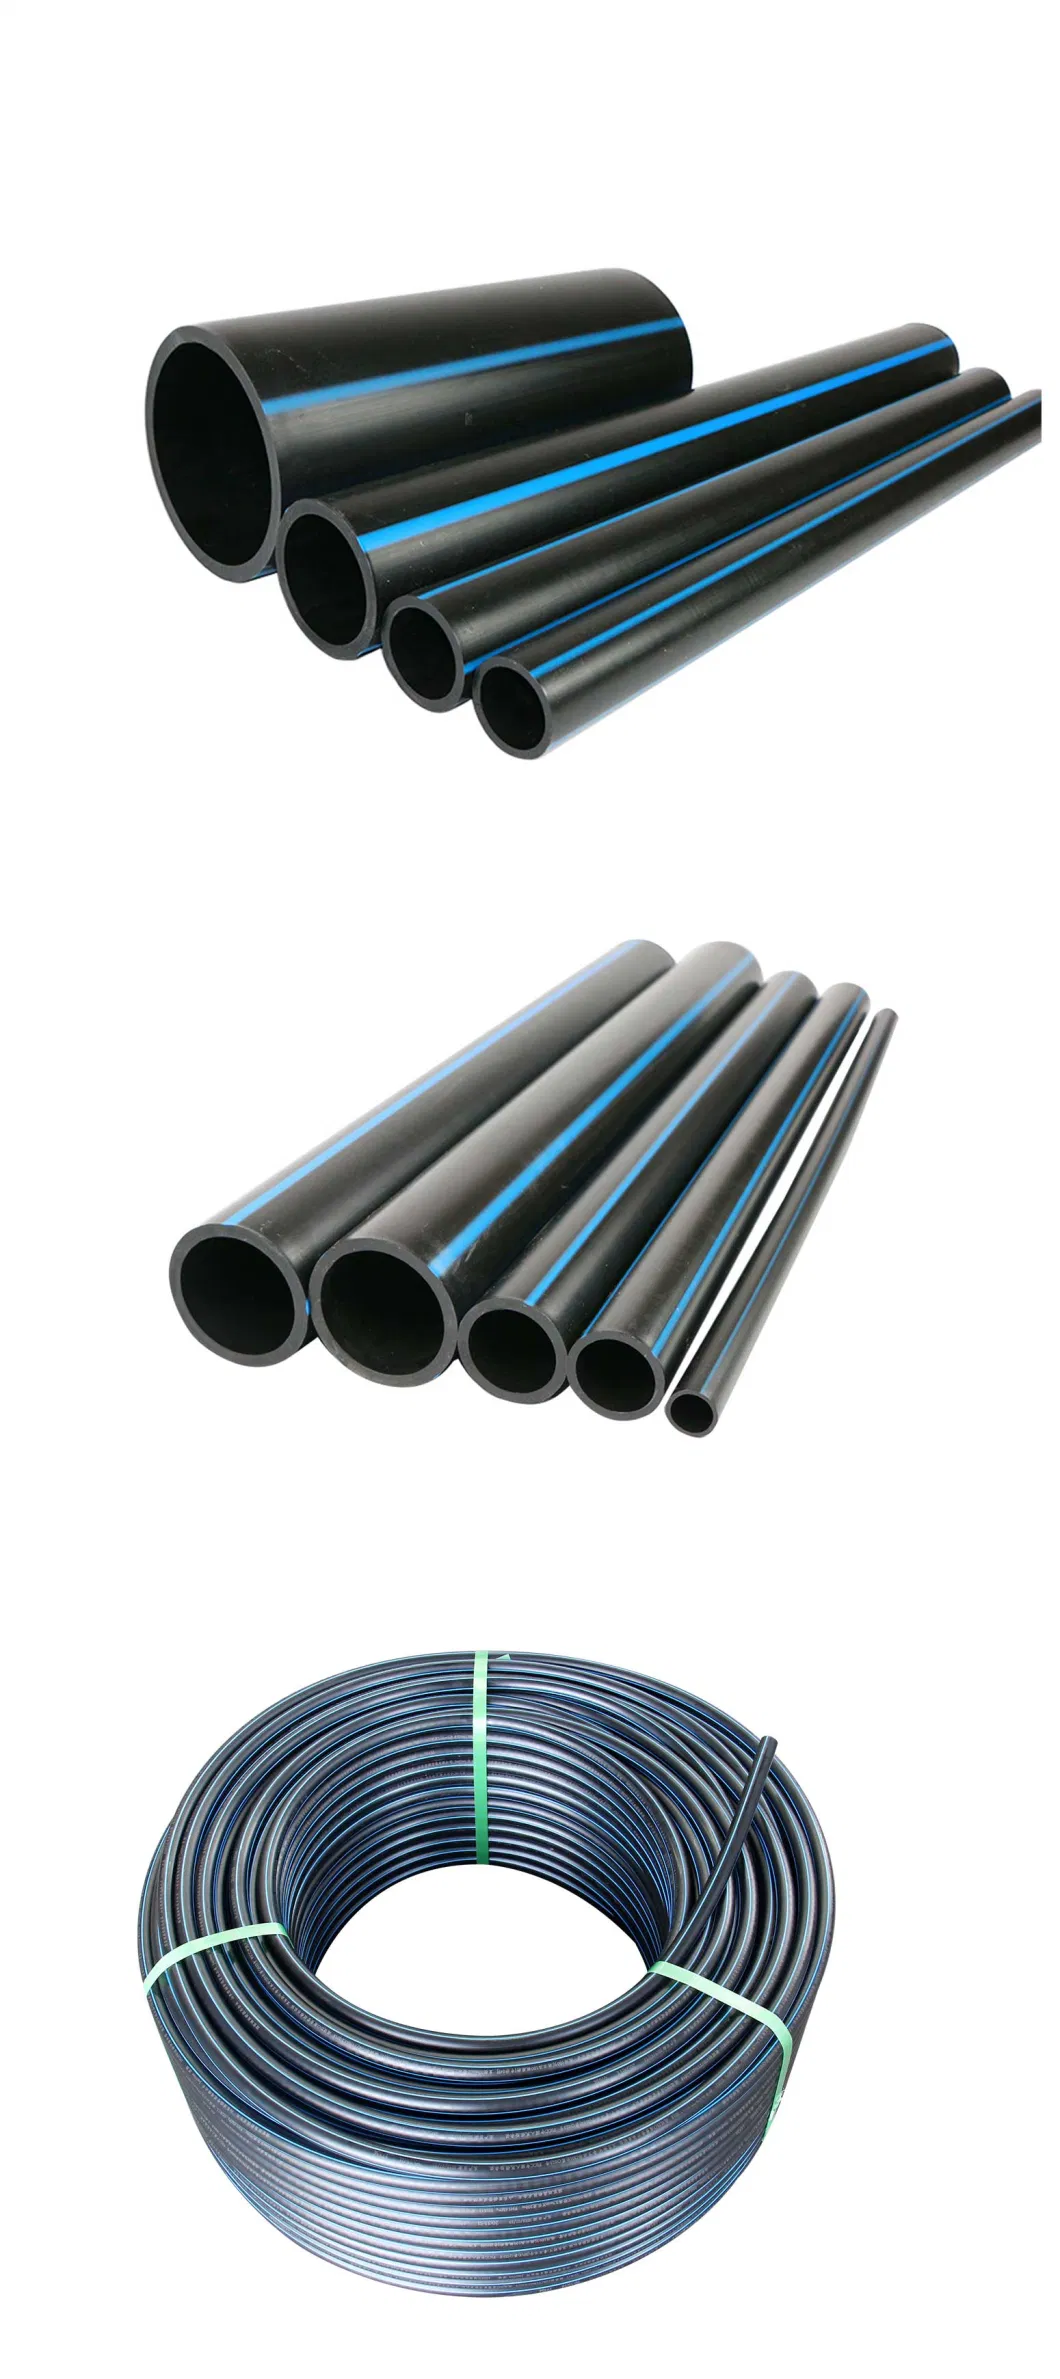 China Manufacturer Plastic Pipe Water/HDPE/PE Pipe for Water Supply and Agriculture Irrigation Sprinkler/Gas/Mining/Cable HDPE Tube